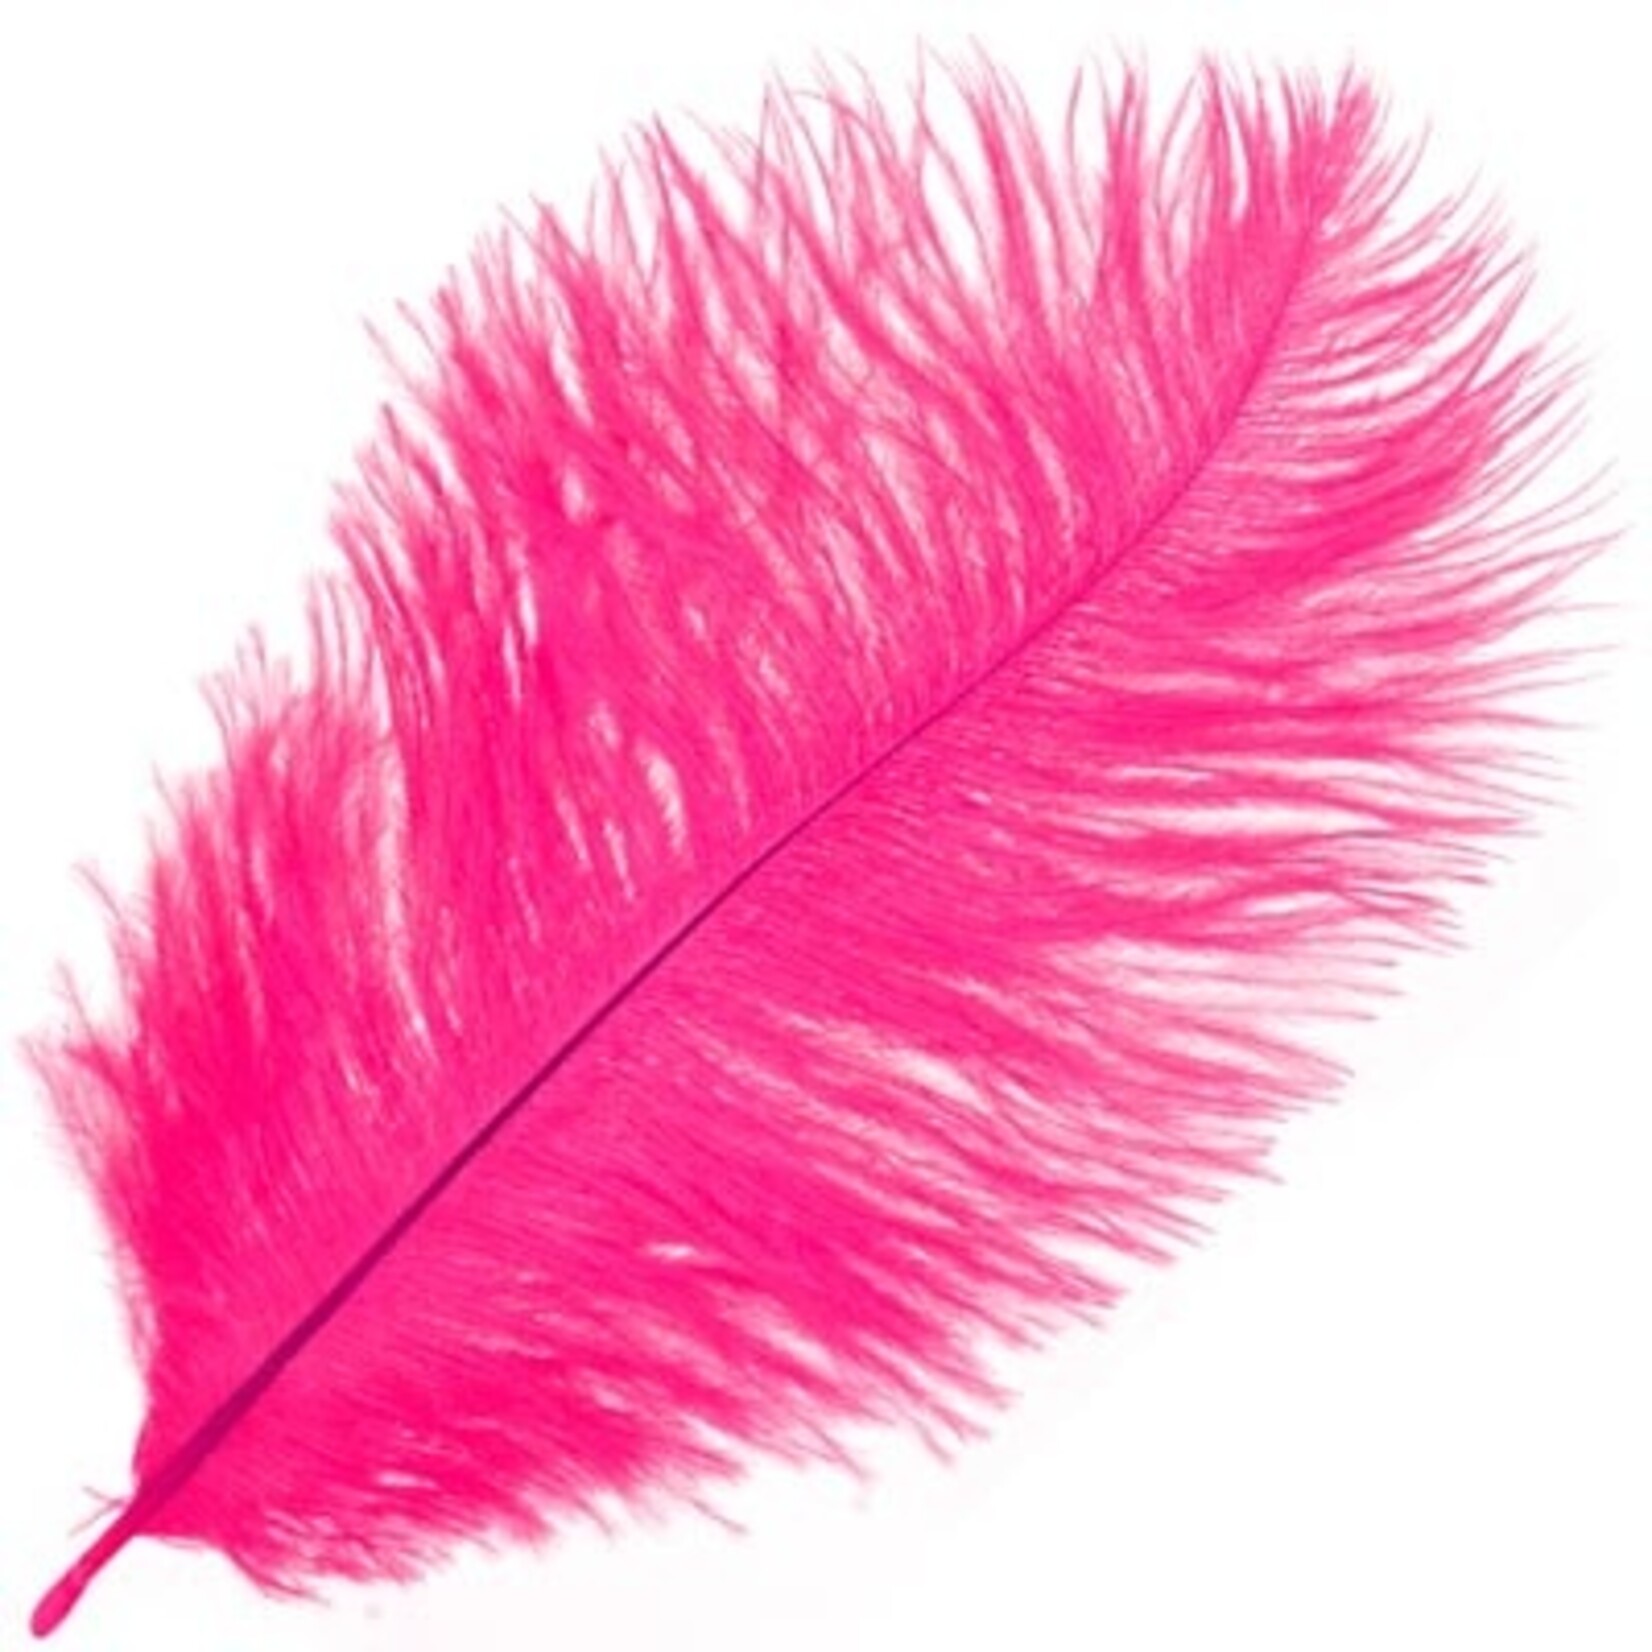 Ostrich Drab Plumes 6-8 Inch (12 pieces) Hot Pink